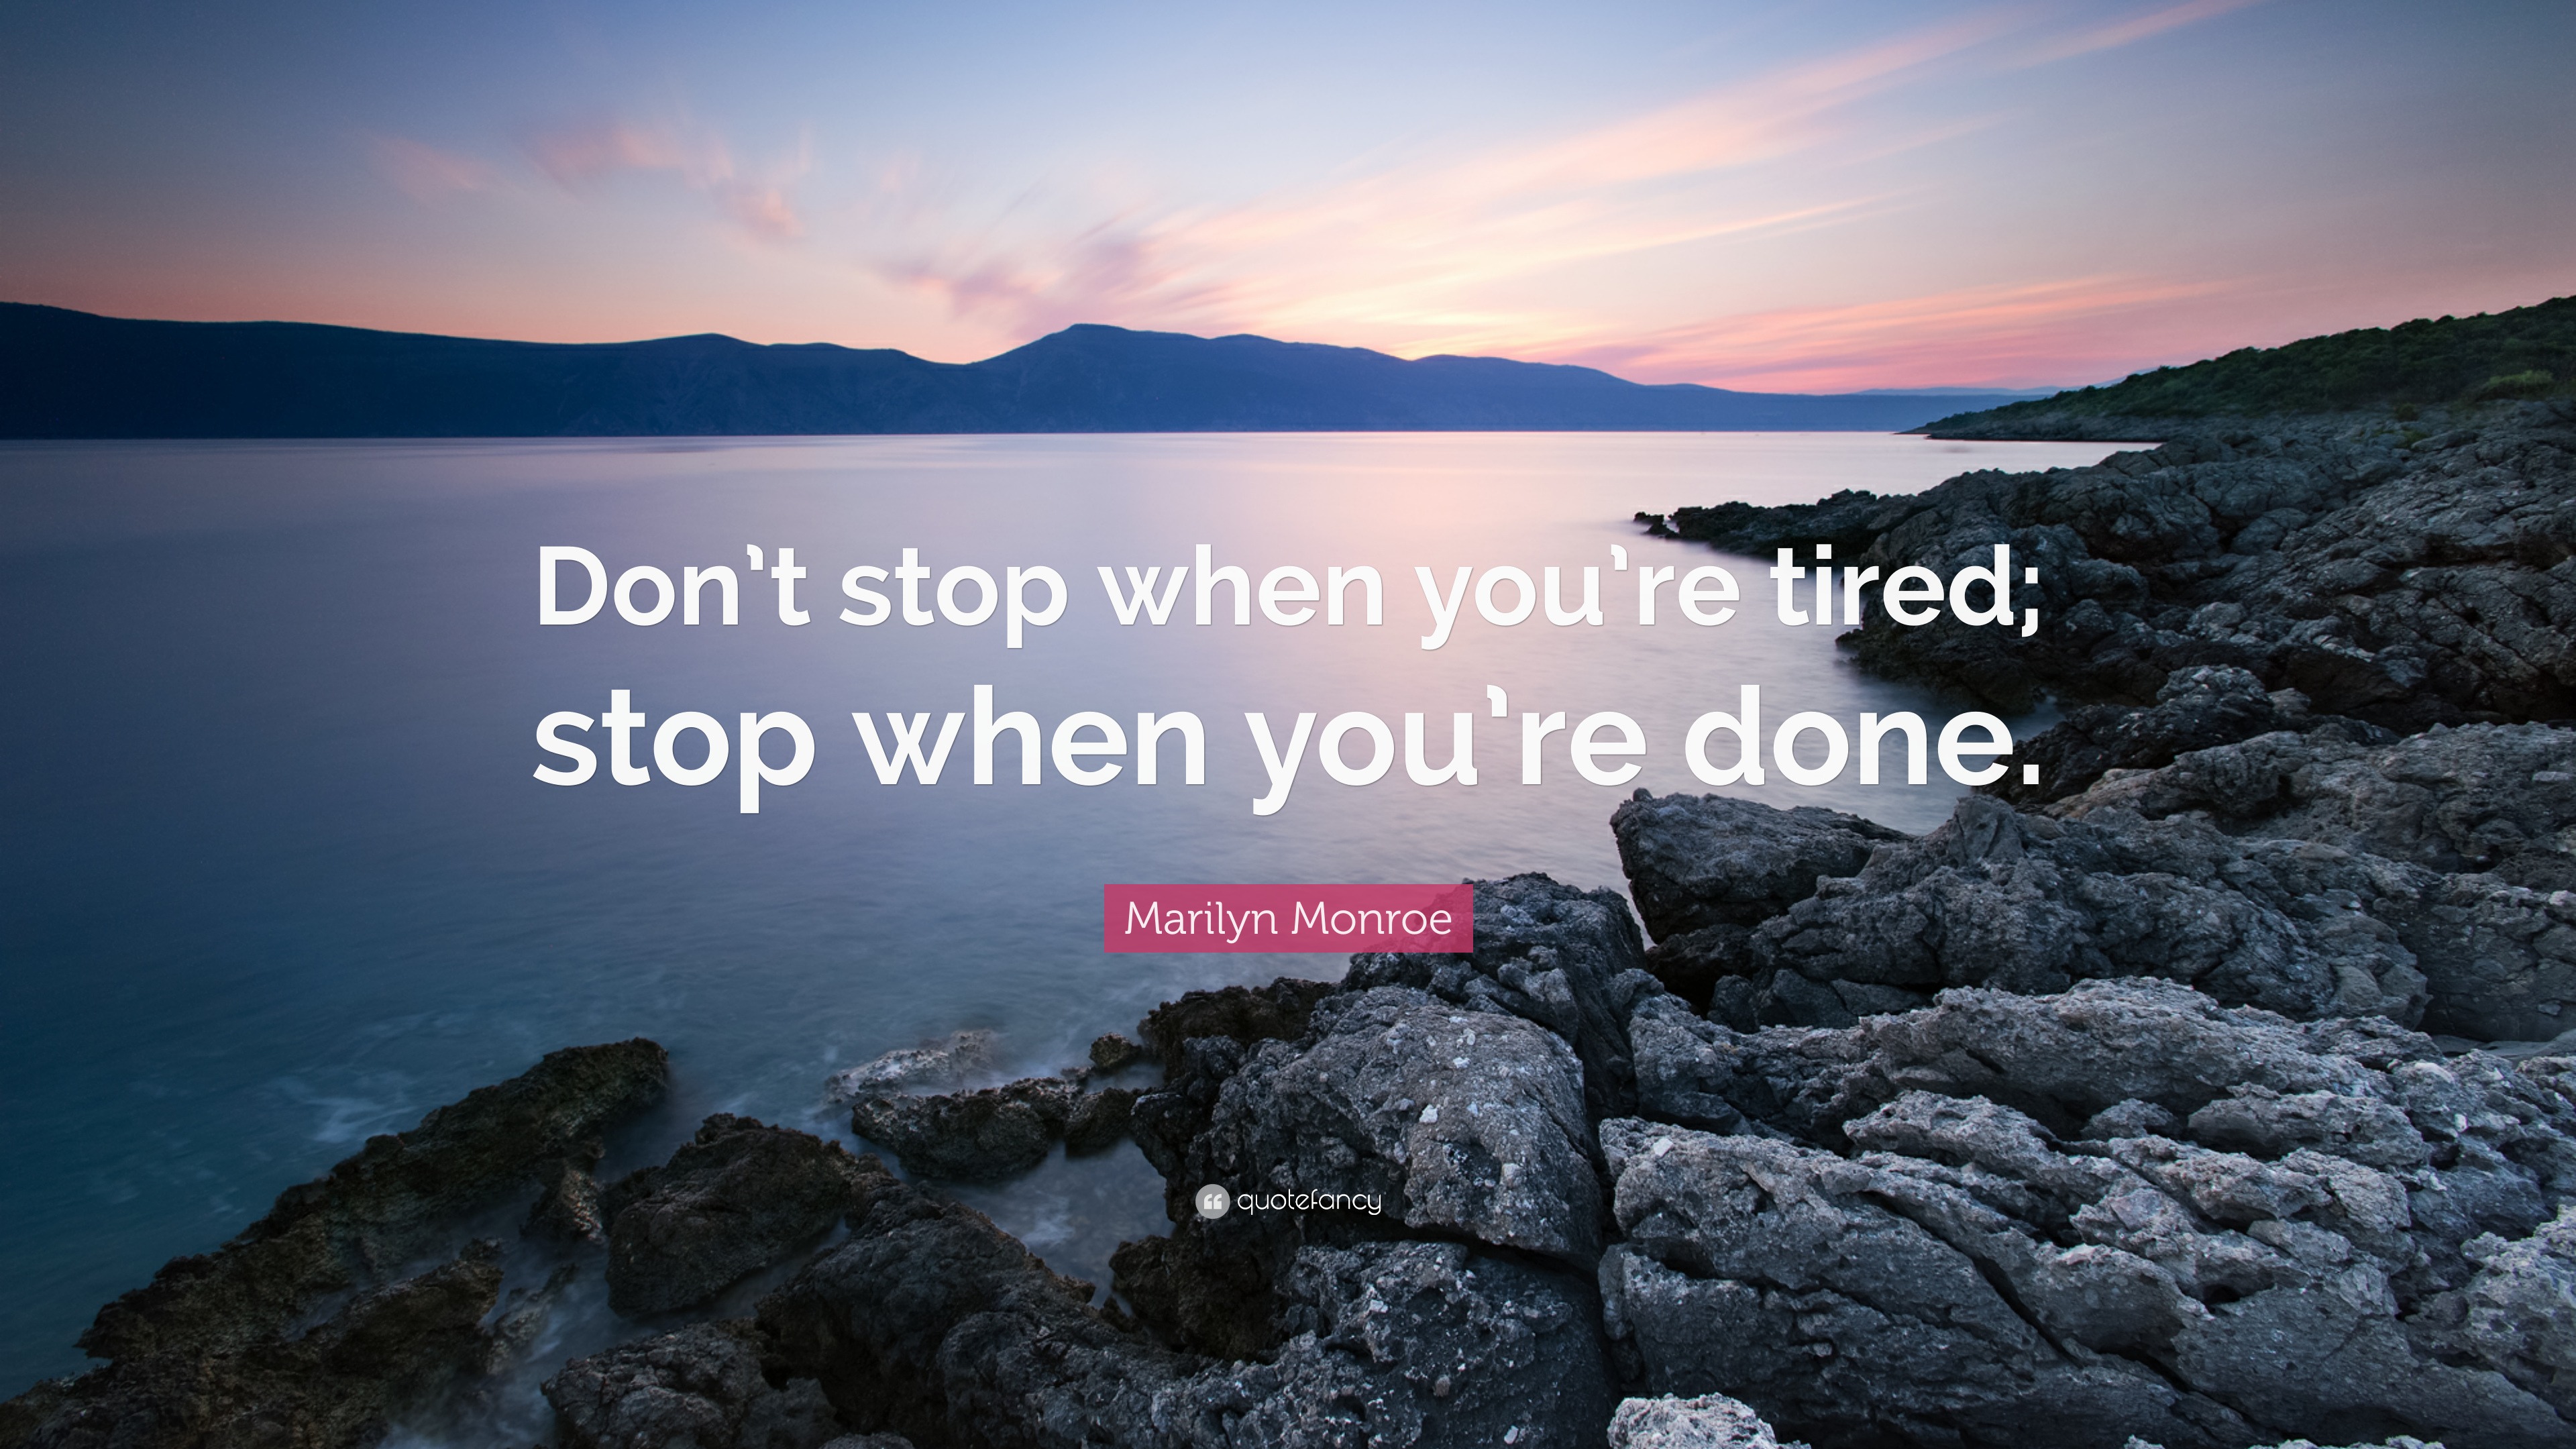 Marilyn Monroe Quote: “Don't stop when you're tired; stop when you're done.”